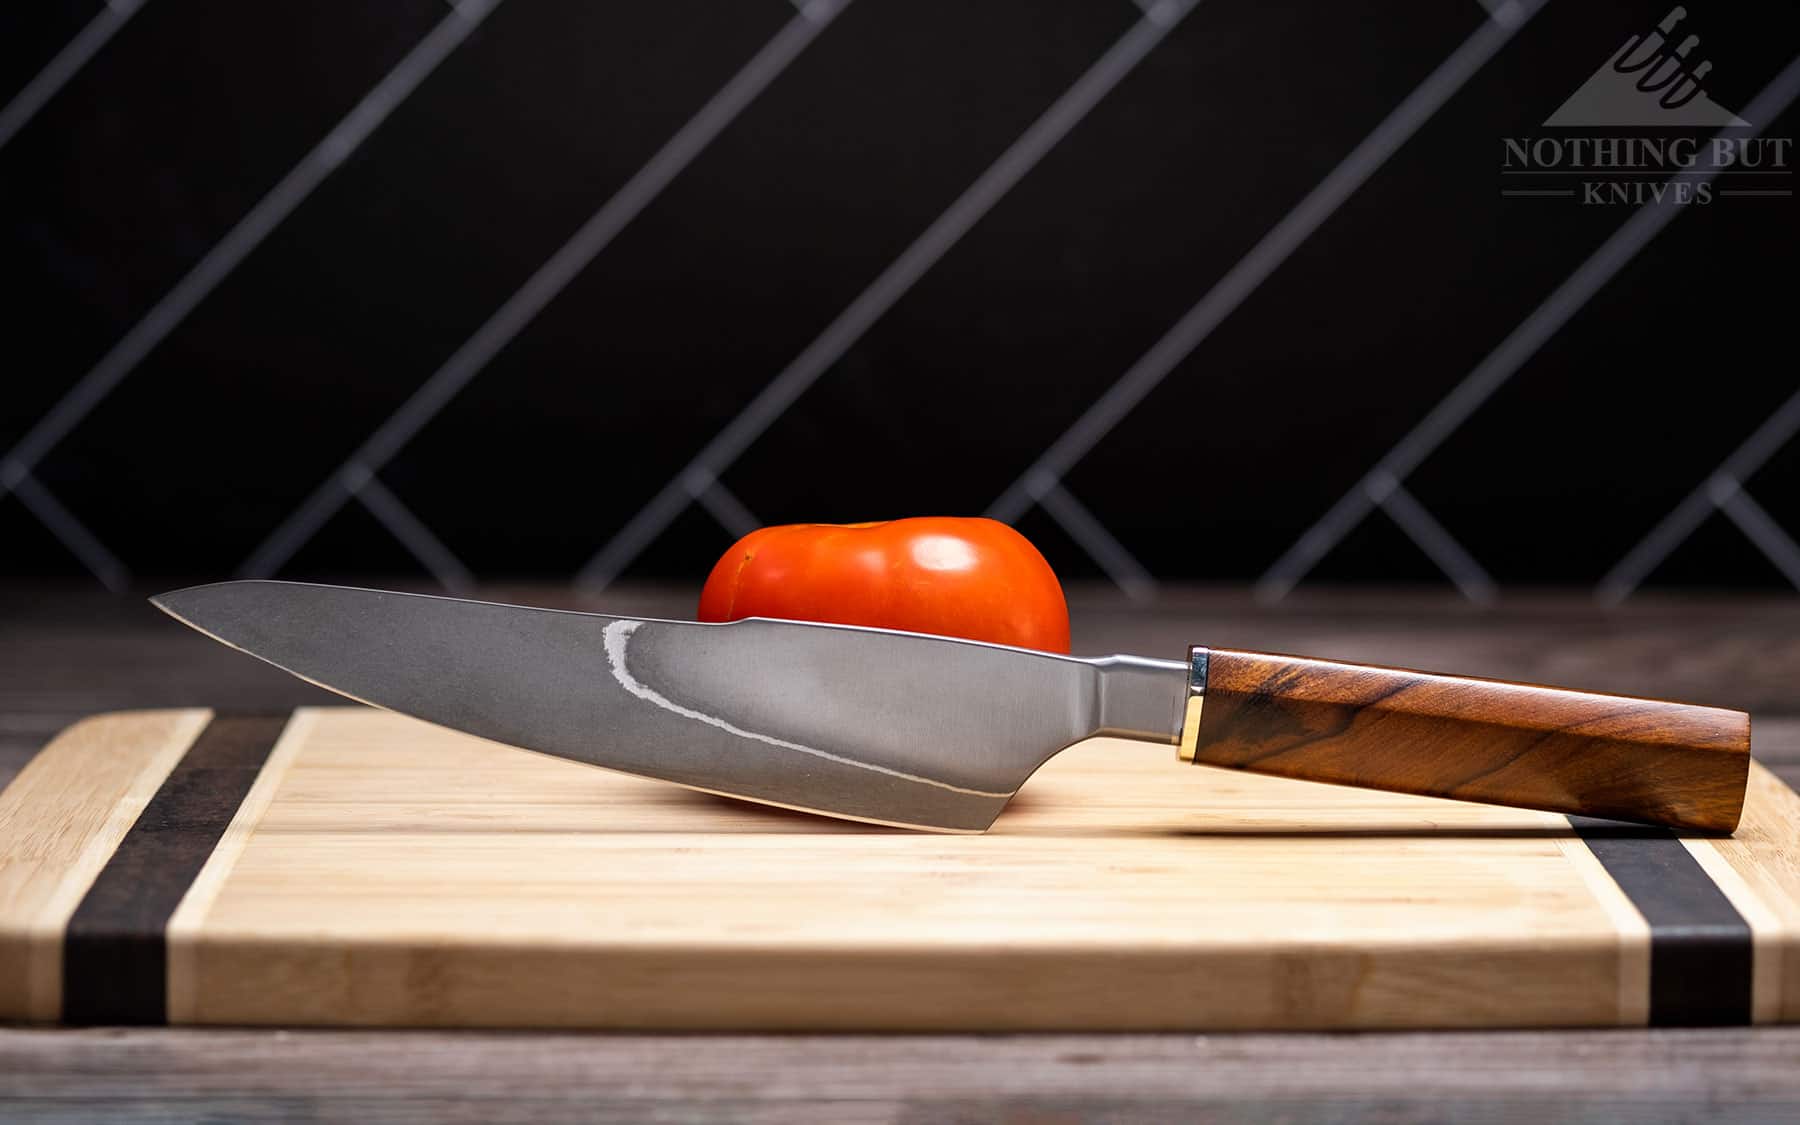 https://www.nothingbutknives.com/wp-content/uploads/2022/08/Xin-Cutlery-8-Inch-Chef-Knife-Review.jpg